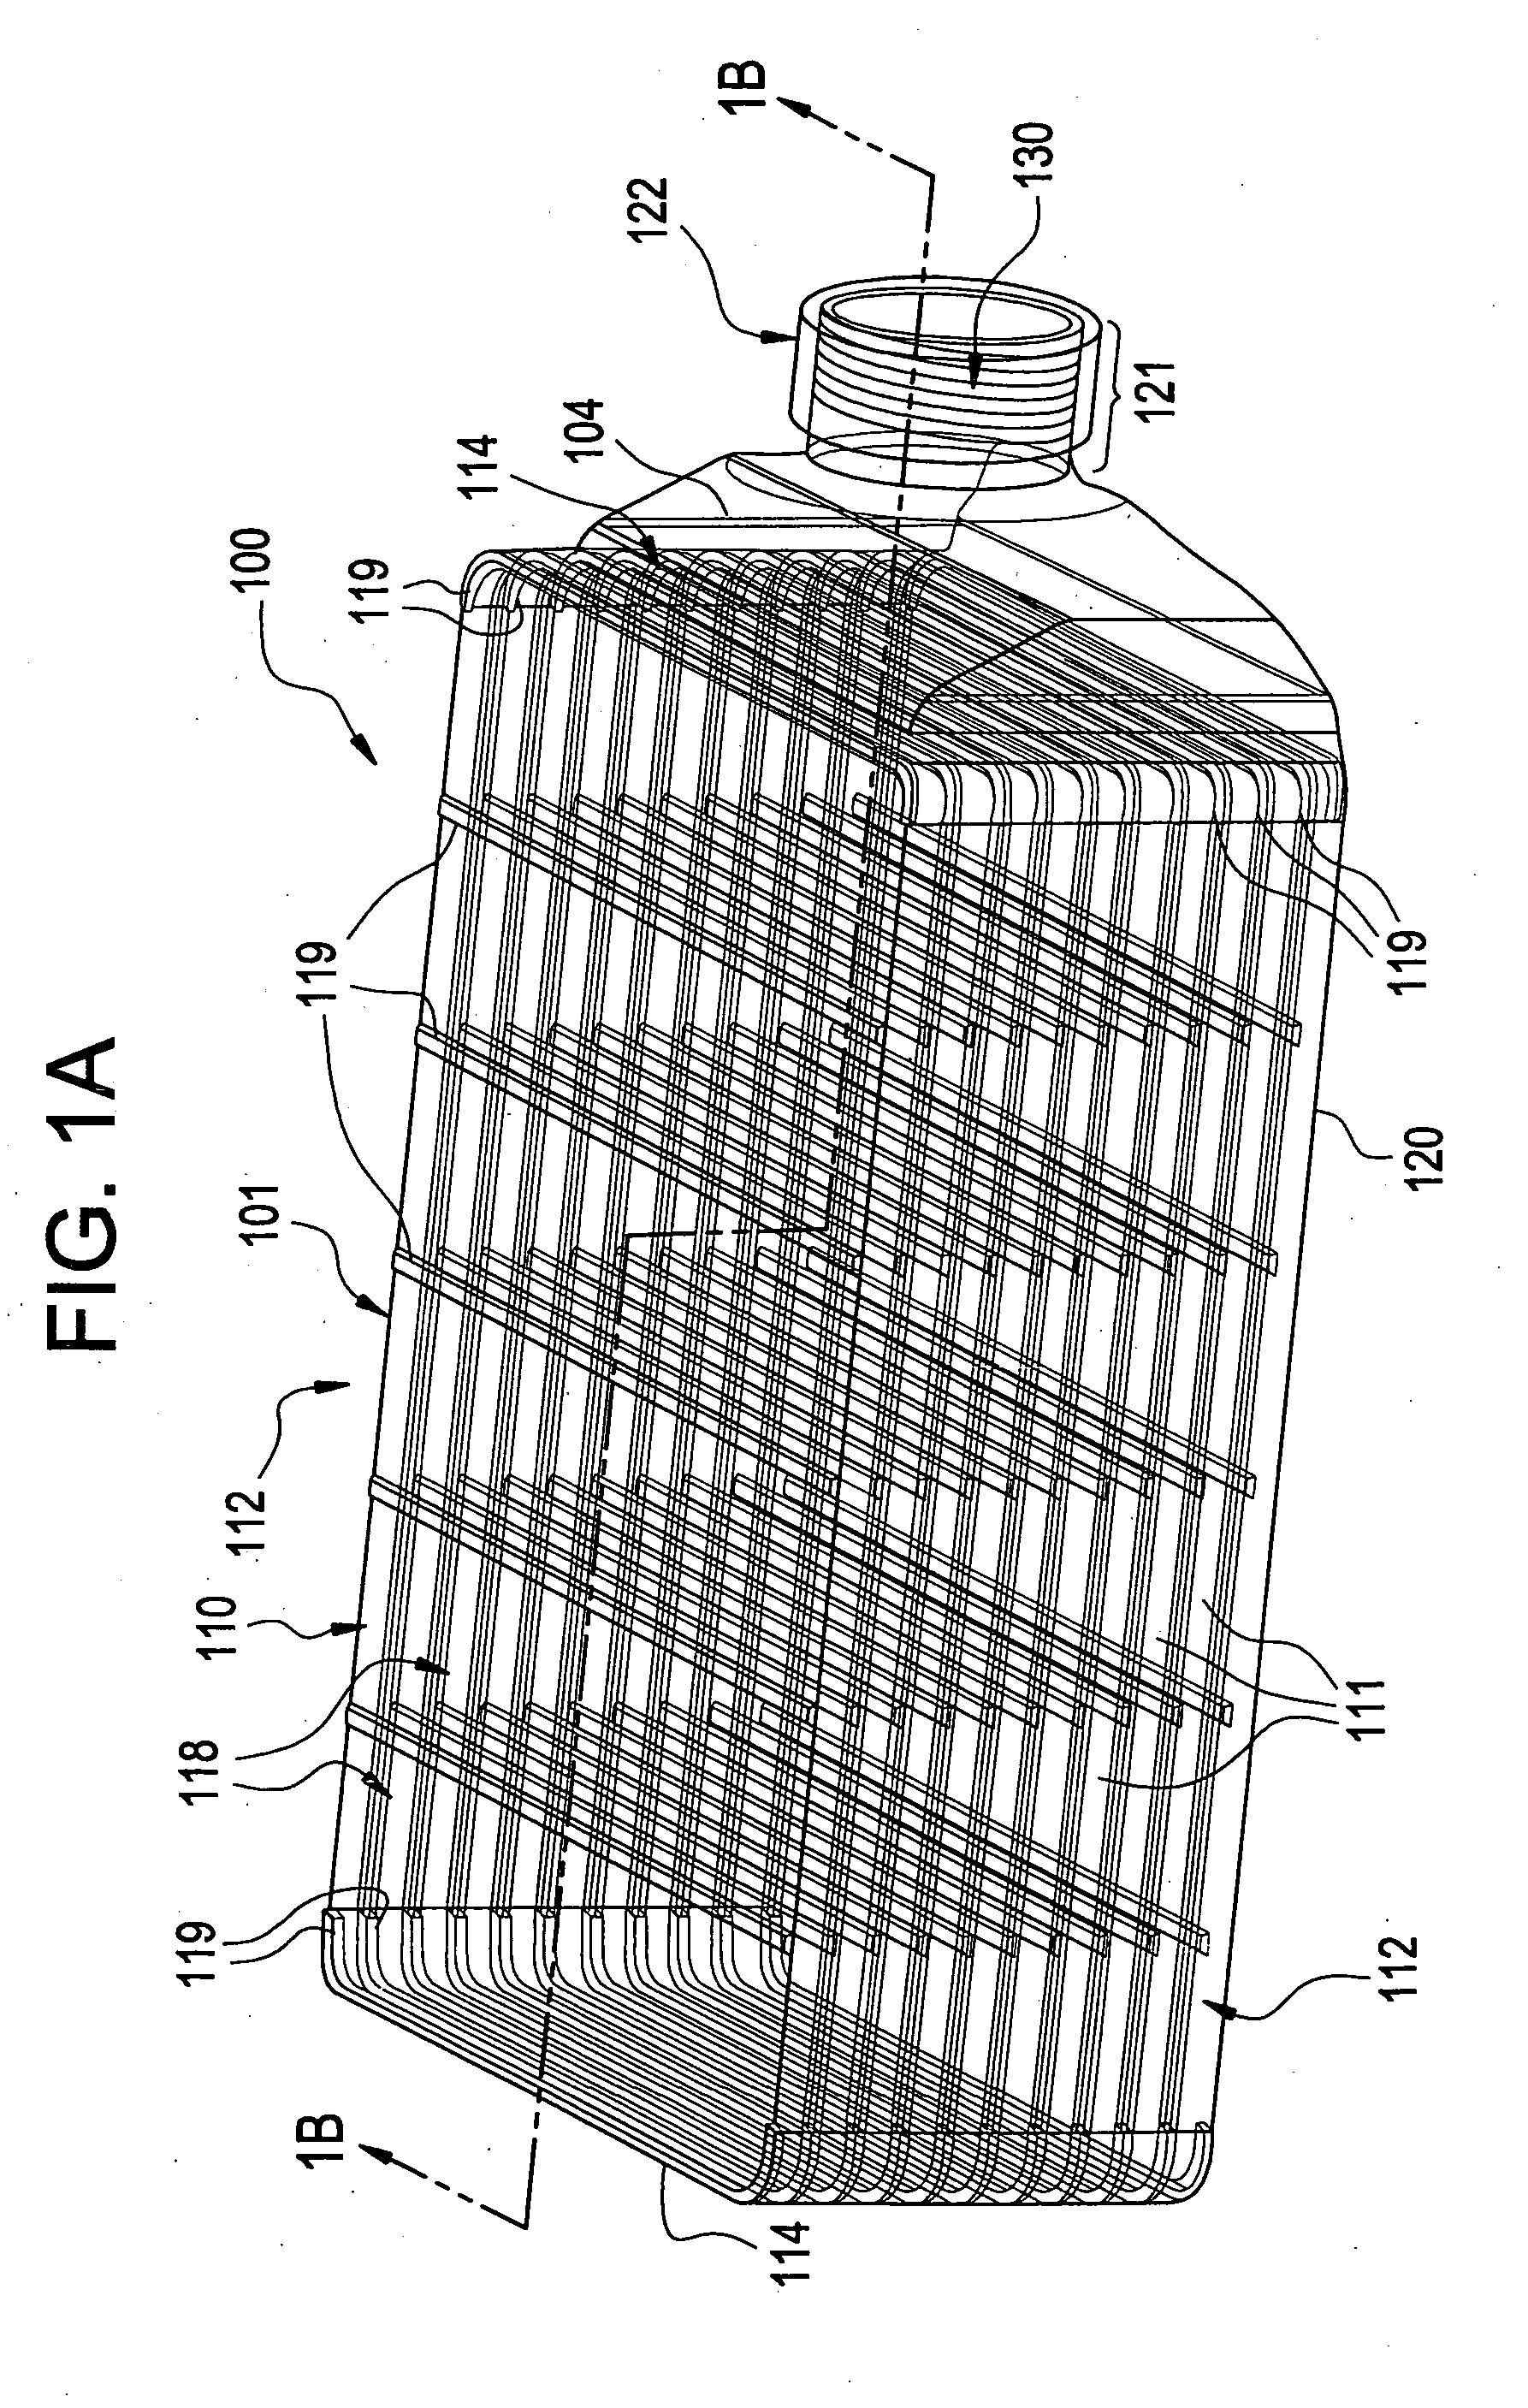 Multilayered cell culture apparatus